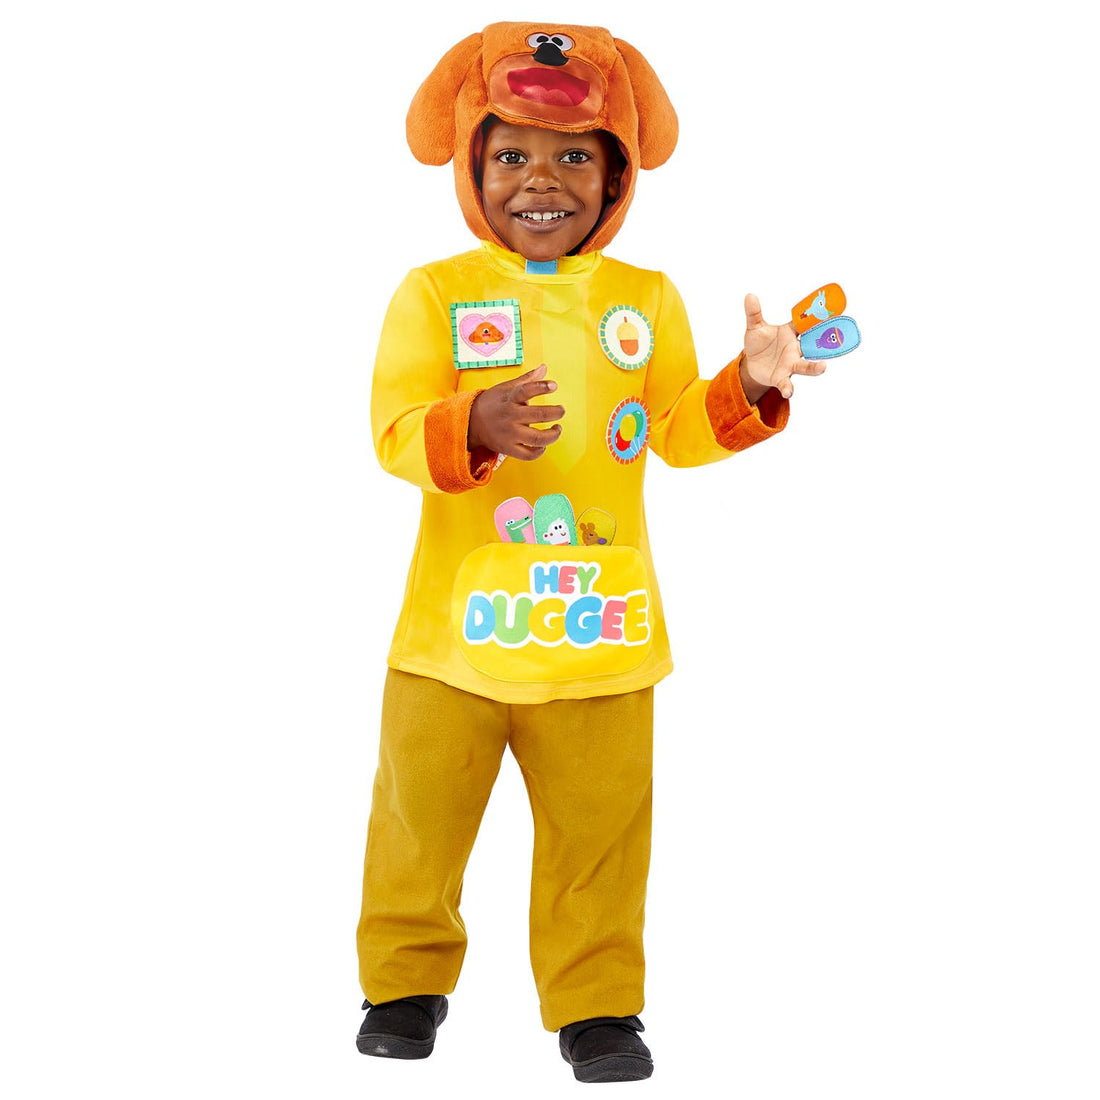 Amscan 9909339 - Baby Officially Licensed Hey Duggee Fancy Dress Costume Age: 12-24 Months